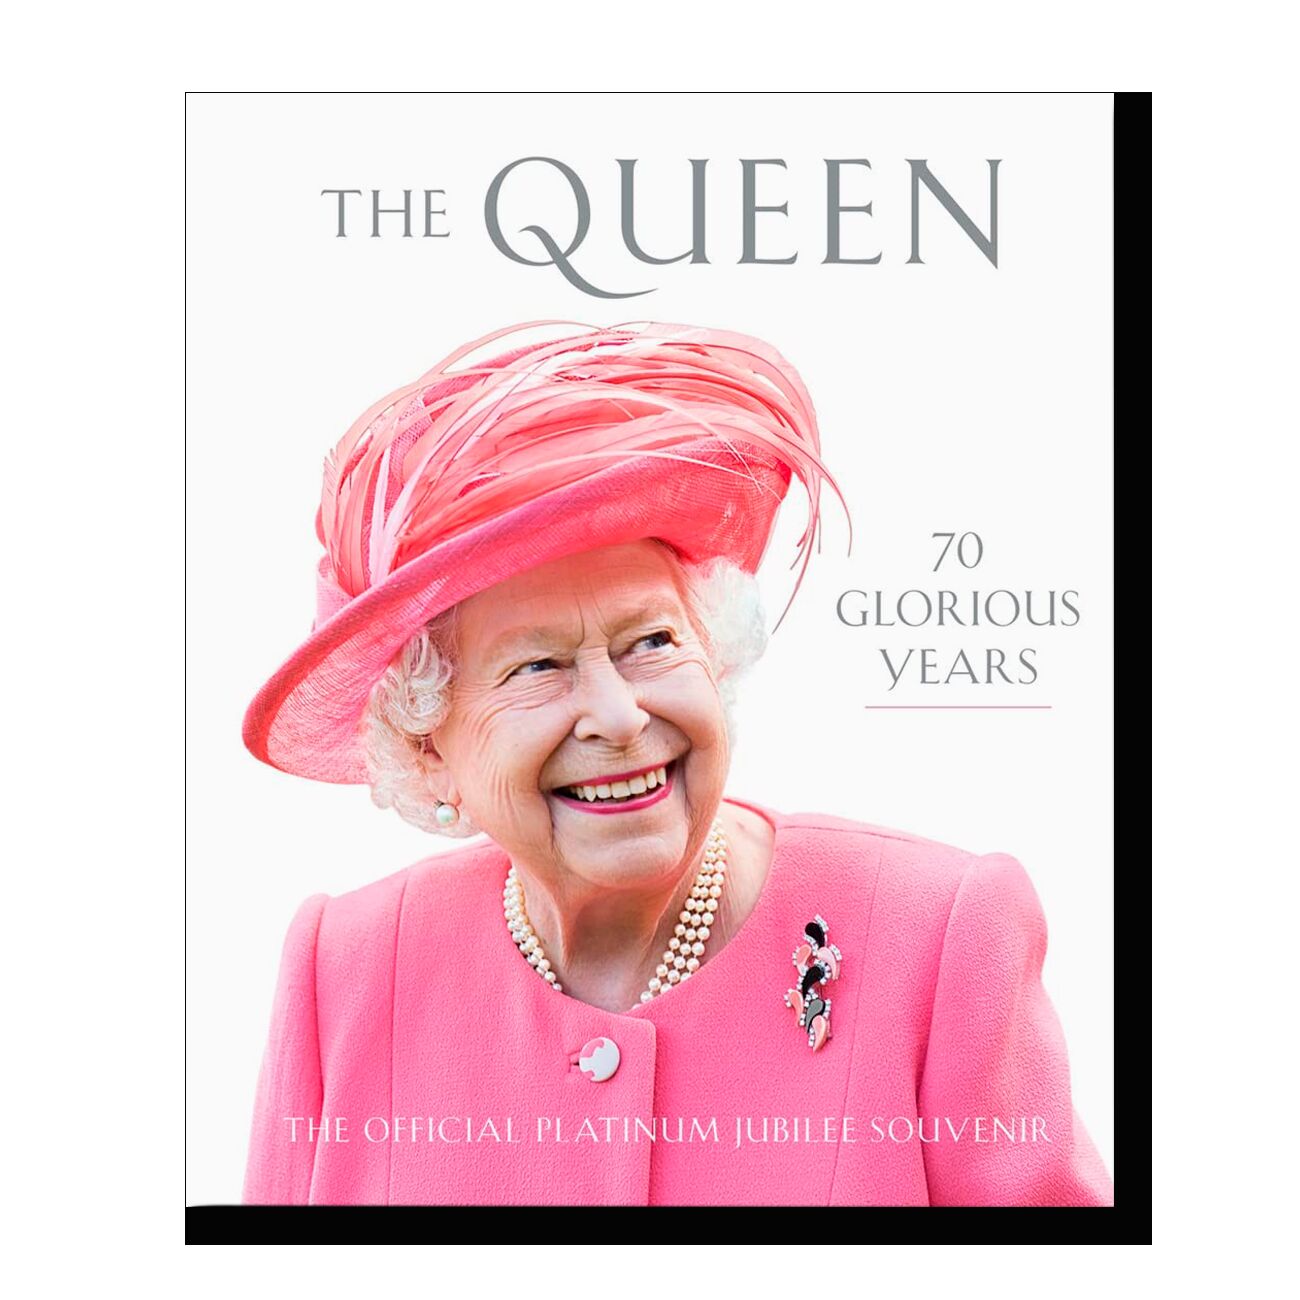 The Queen: 70 Glorious Years